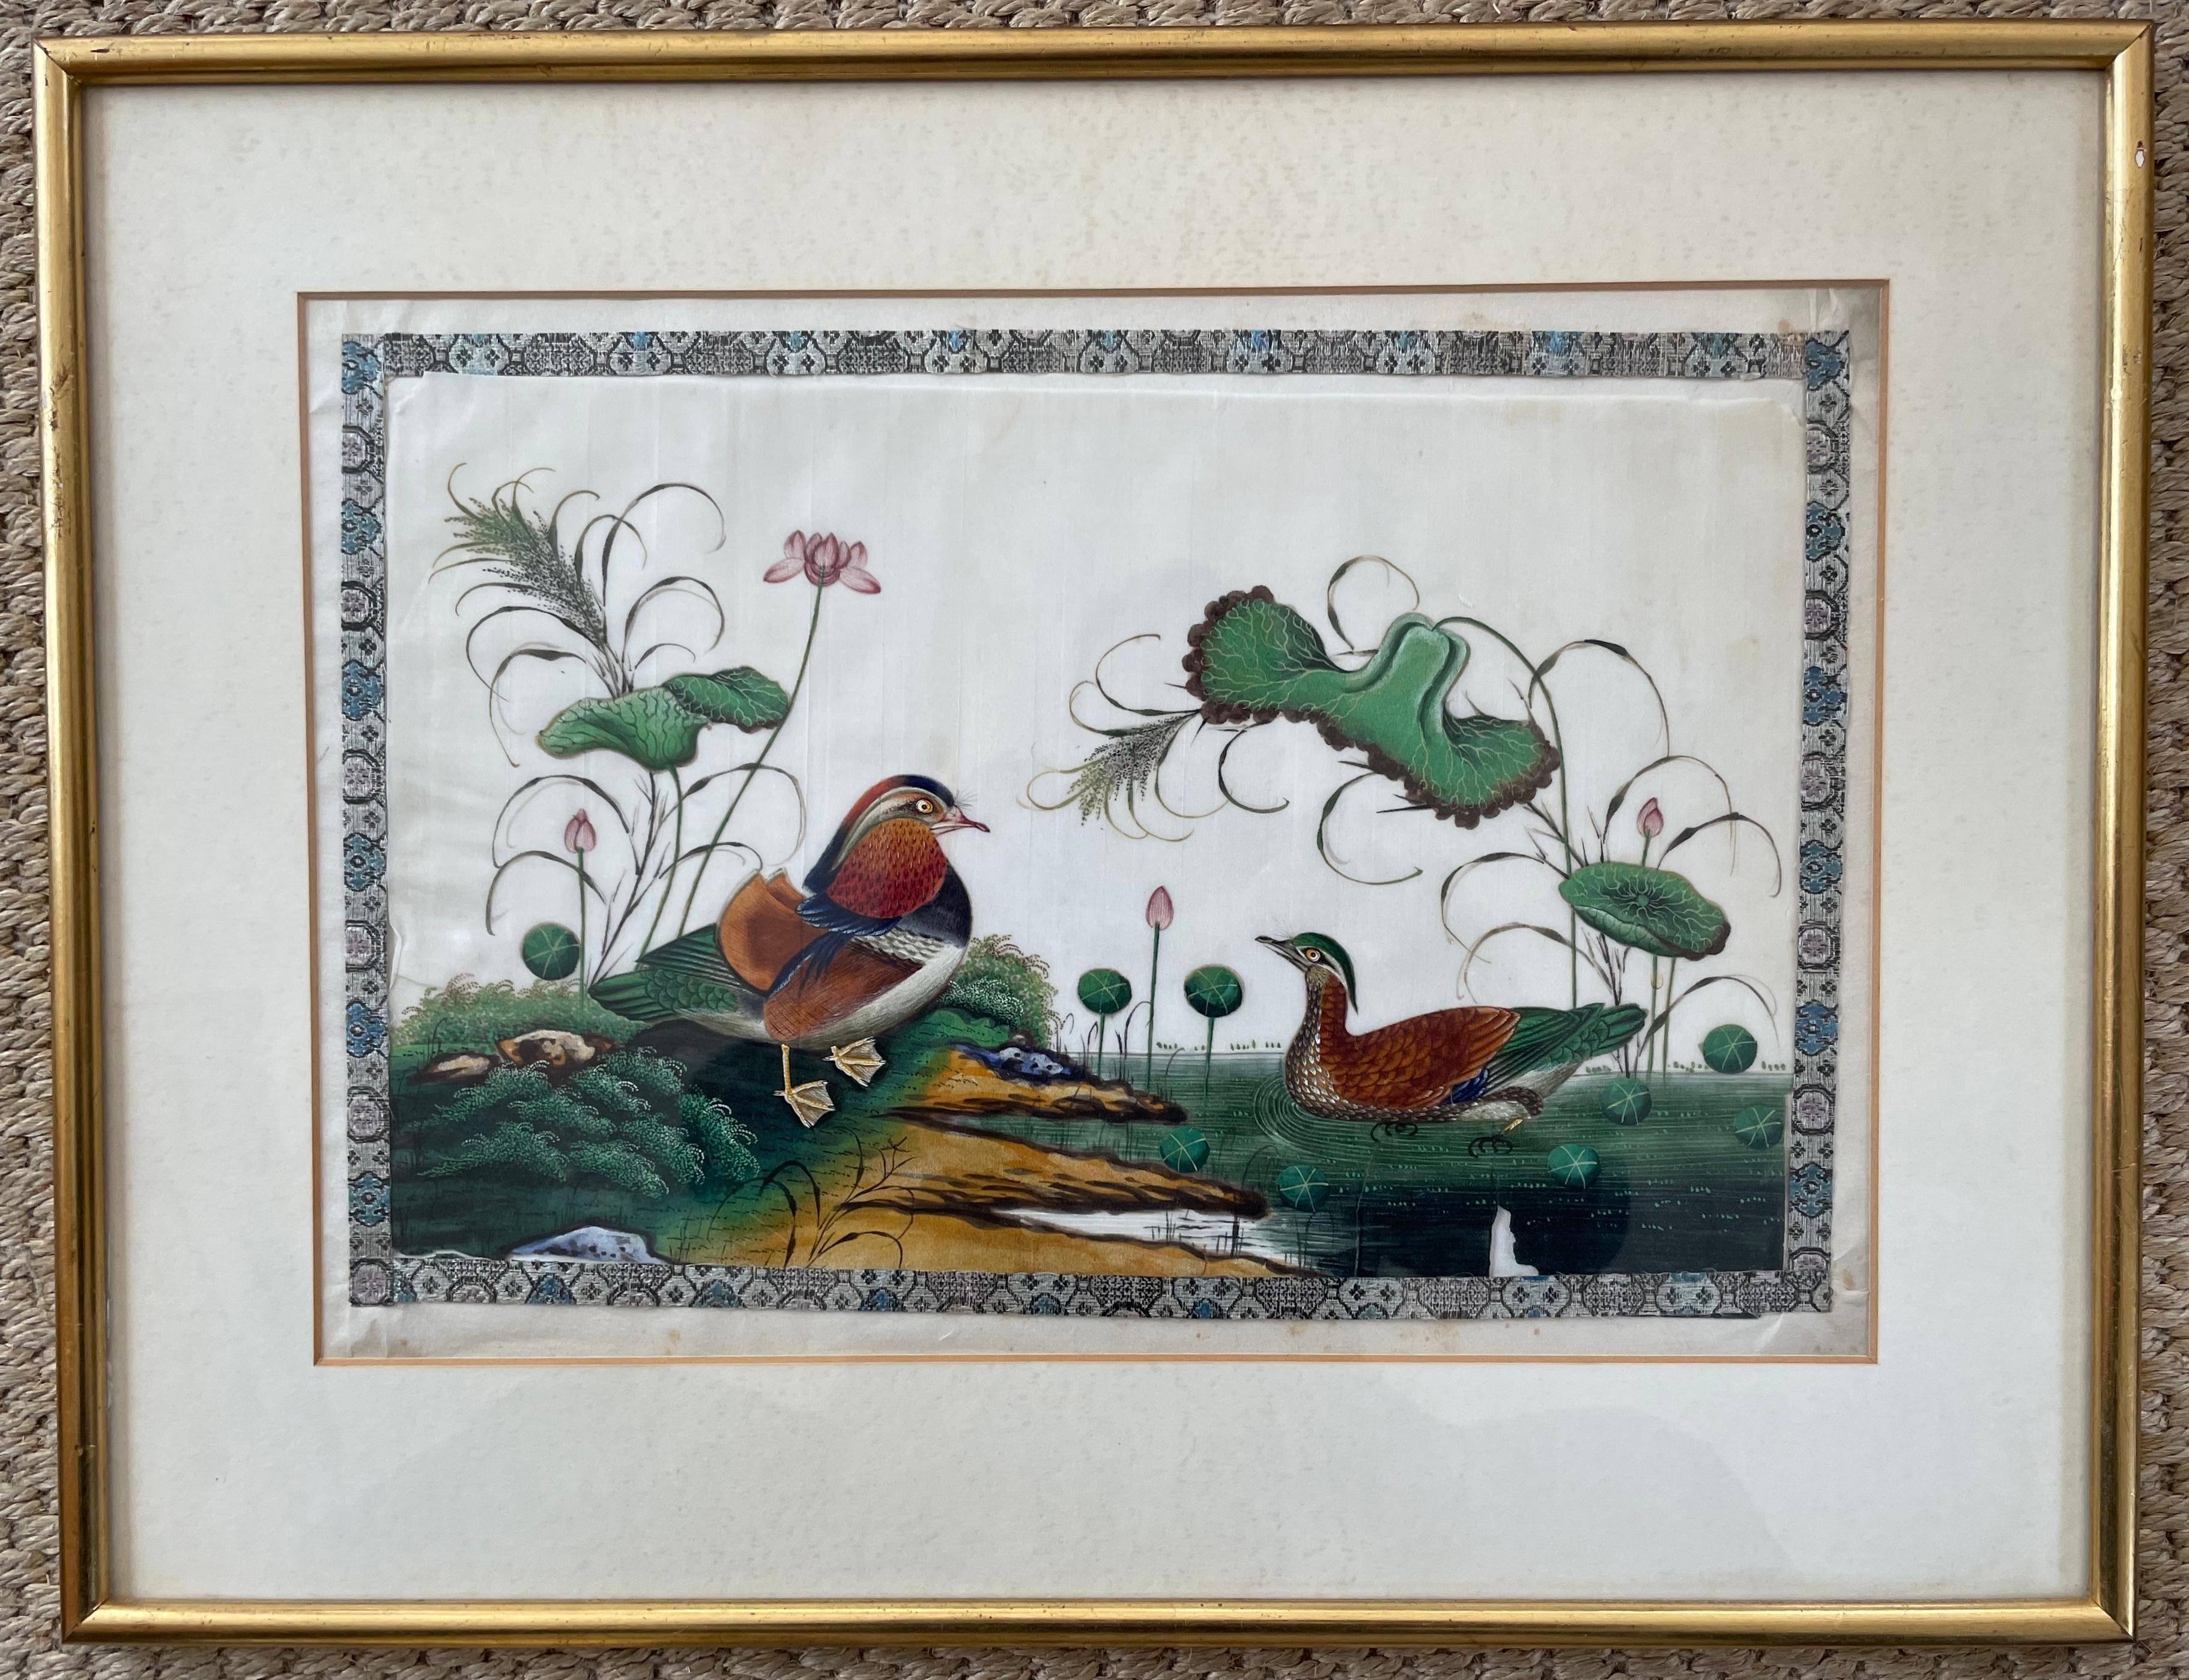 Set of three painted silk bird paintings. Set of three Chinese silk painted bird pictures with embroidered border, framed in later gilt frames including oriental mandarin ducks, parrots and lyre birds. China, late 19th century 
Dimensions: 18.75” W